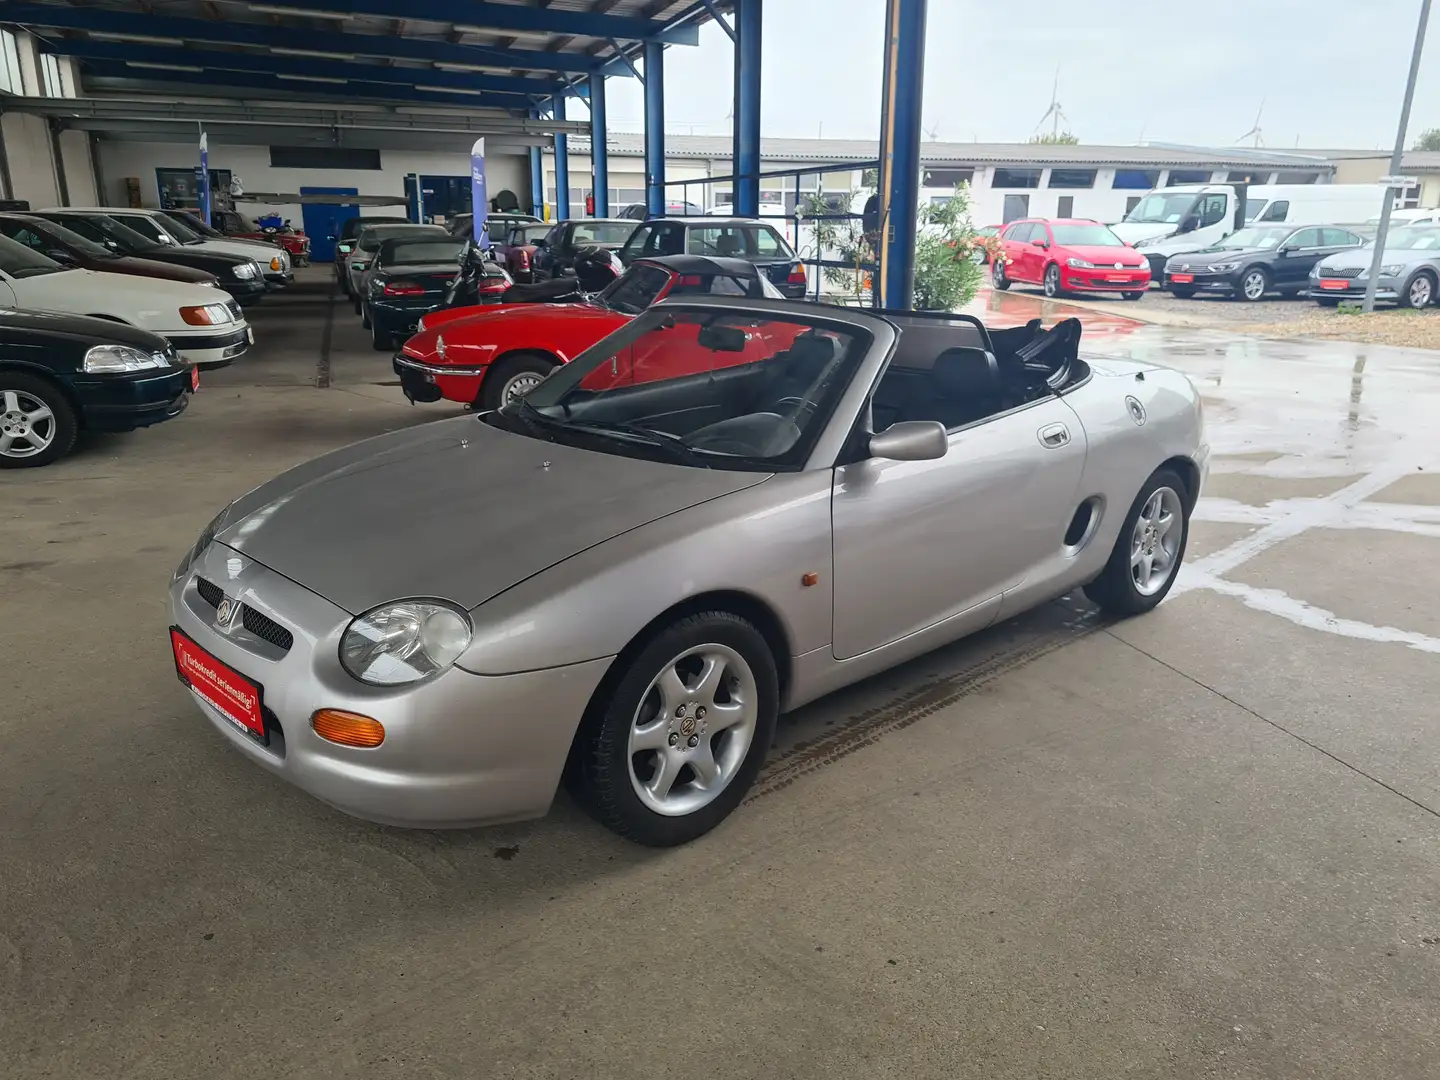 MG MGF F 1,8i Cabrio - neues Pickerl! Argent - 1